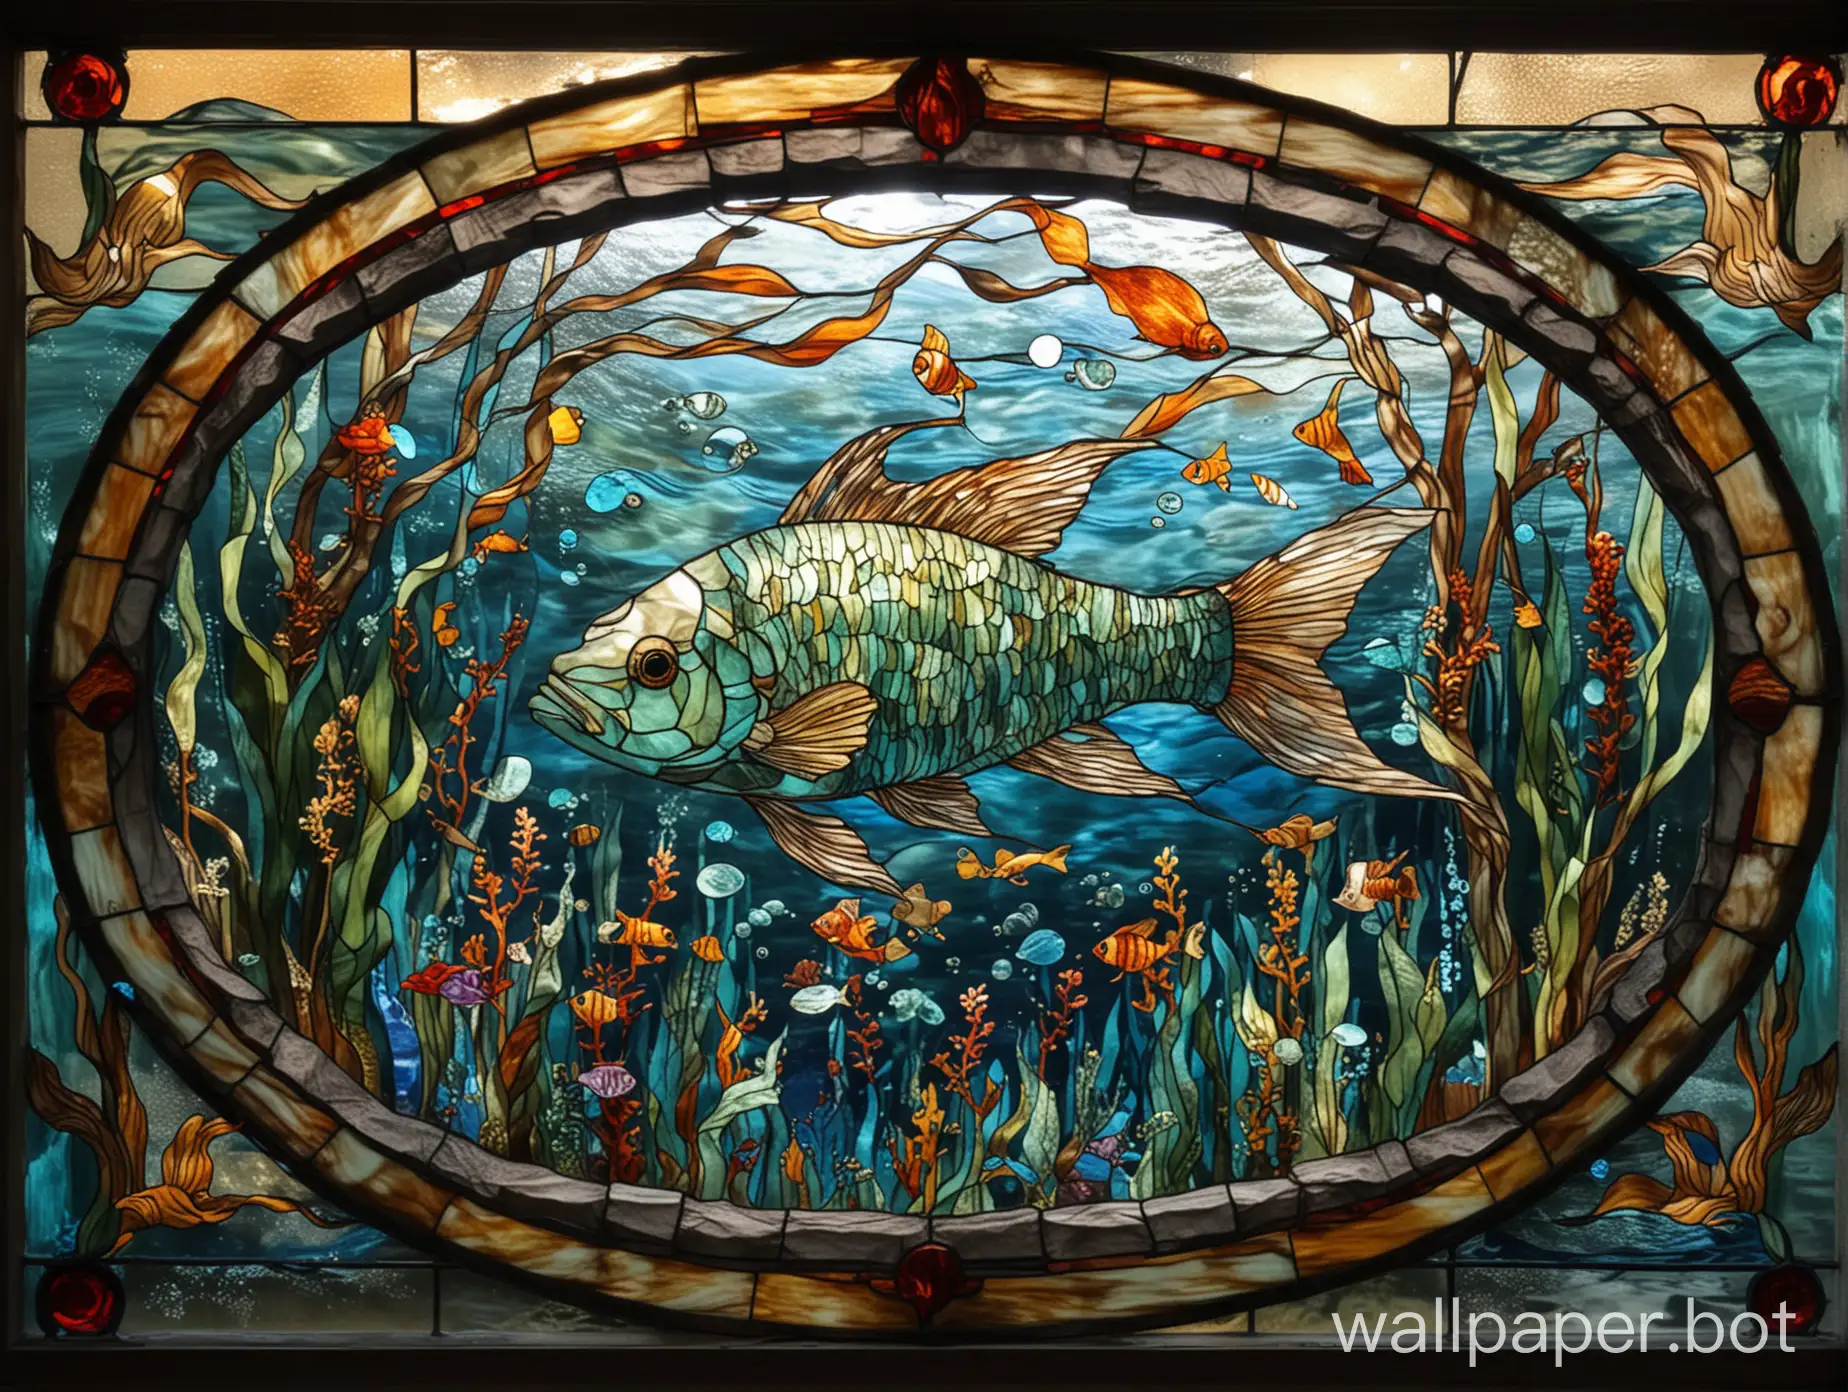 stained glass window depicting a magical fish underwater